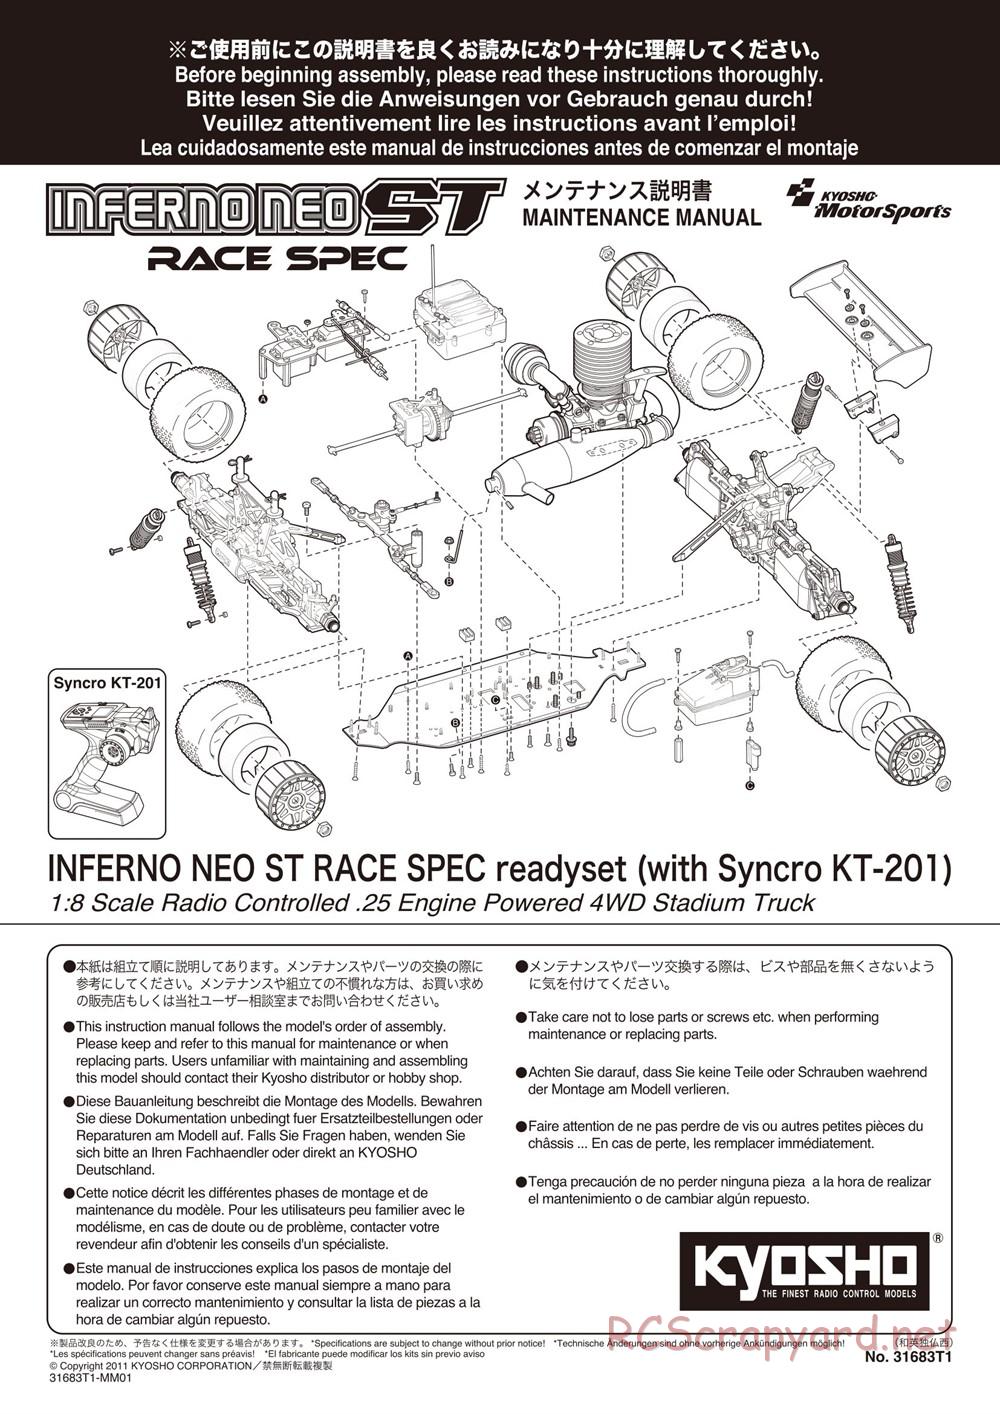 Kyosho - Inferno Neo ST - Manual - Page 1